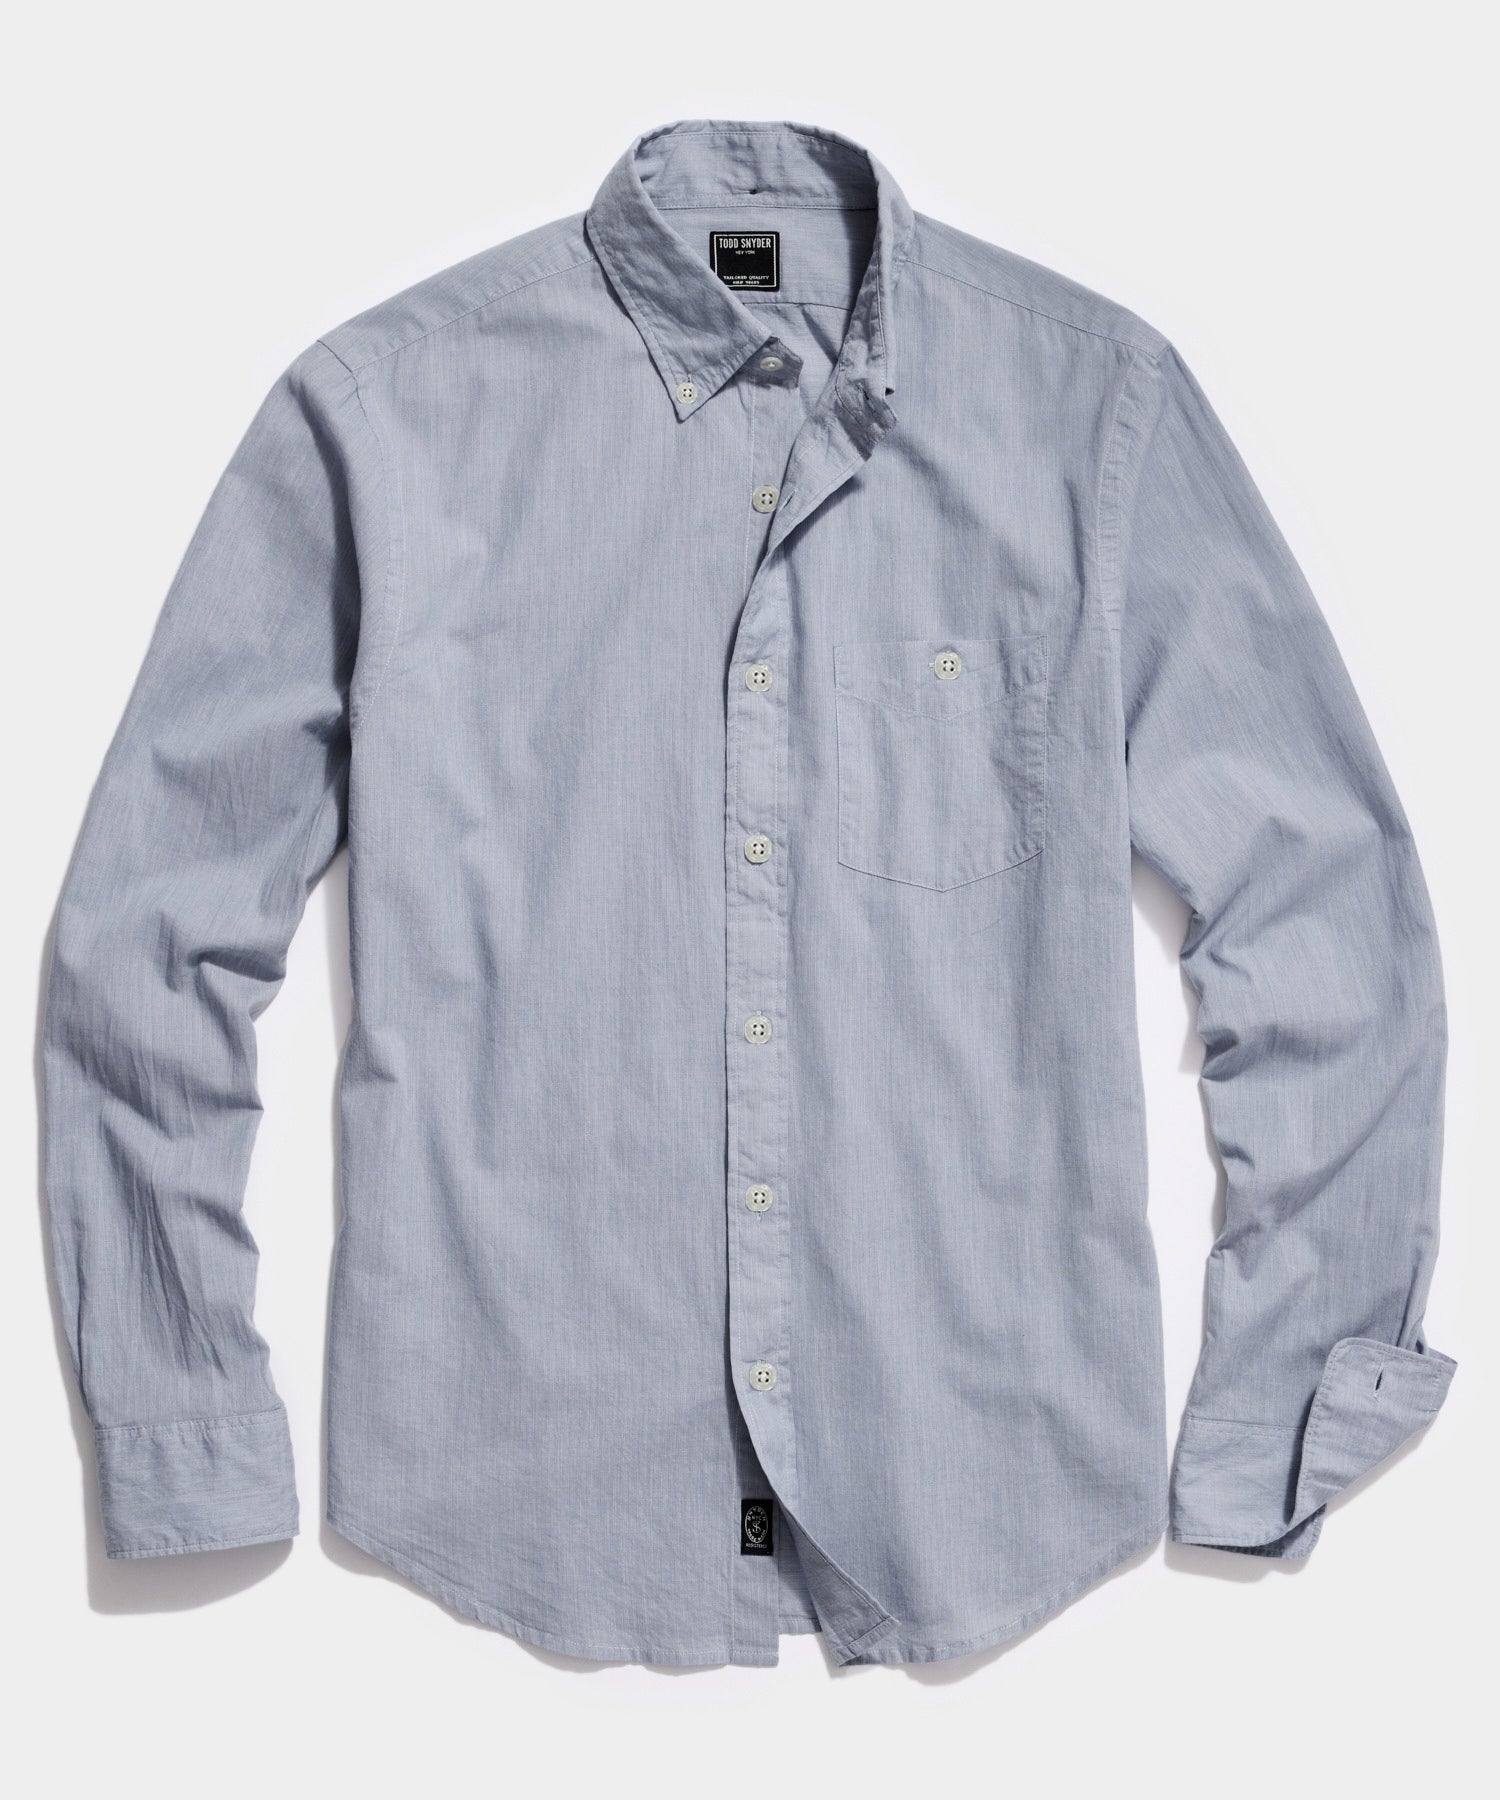 Classic Fit Summerweight Favorite Shirt in Chambray Blue